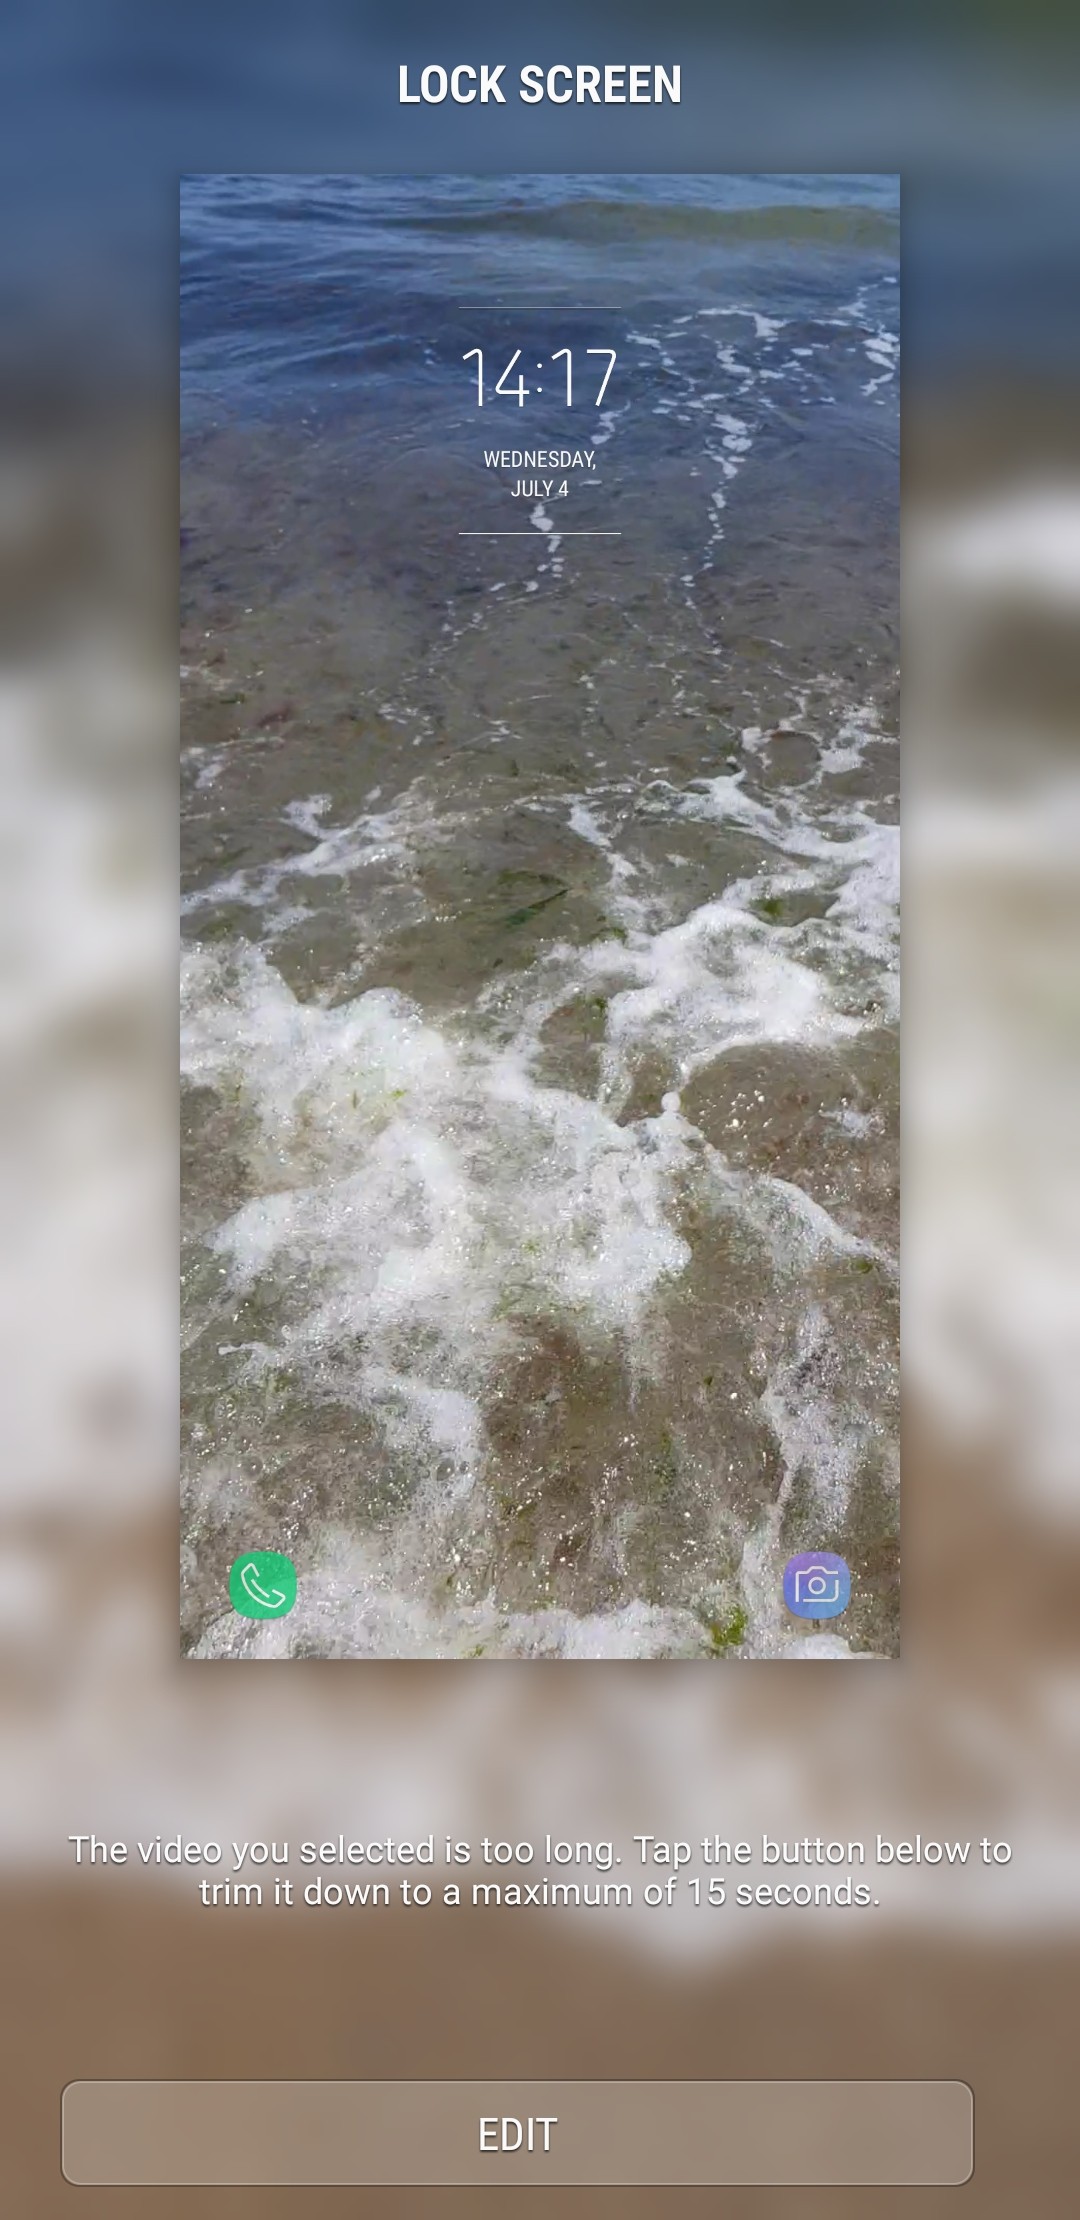 How to Set a Video as Lock Screen Wallpaper on Samsung Galaxy S8/Note 8